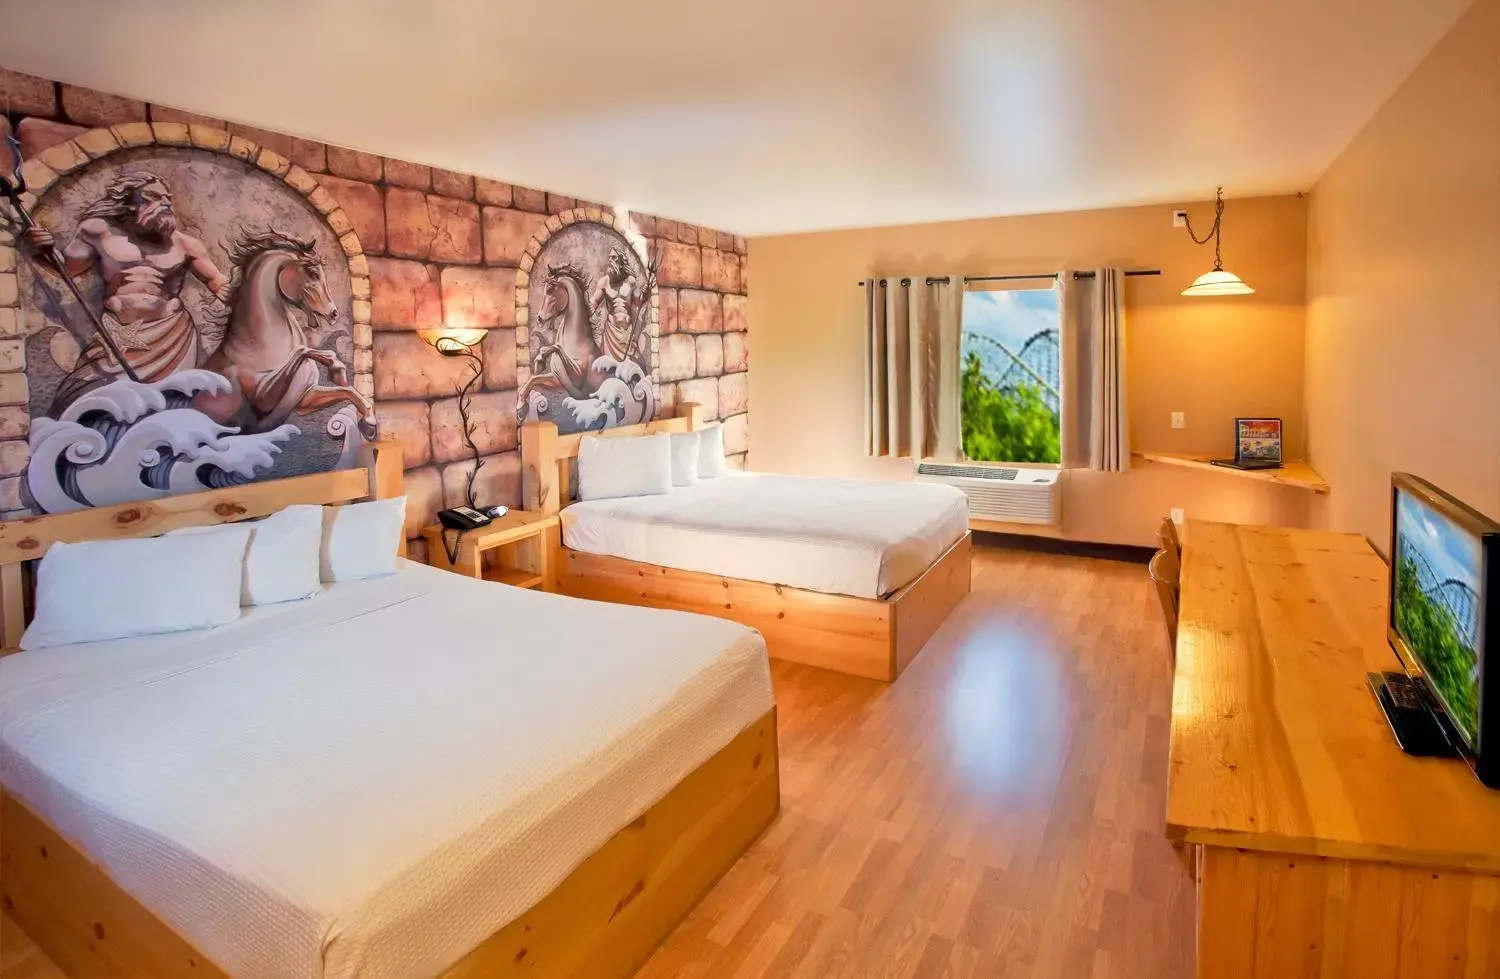 Bed in MT. OLYMPUS WATER PARK AND THEME PARK RESORT